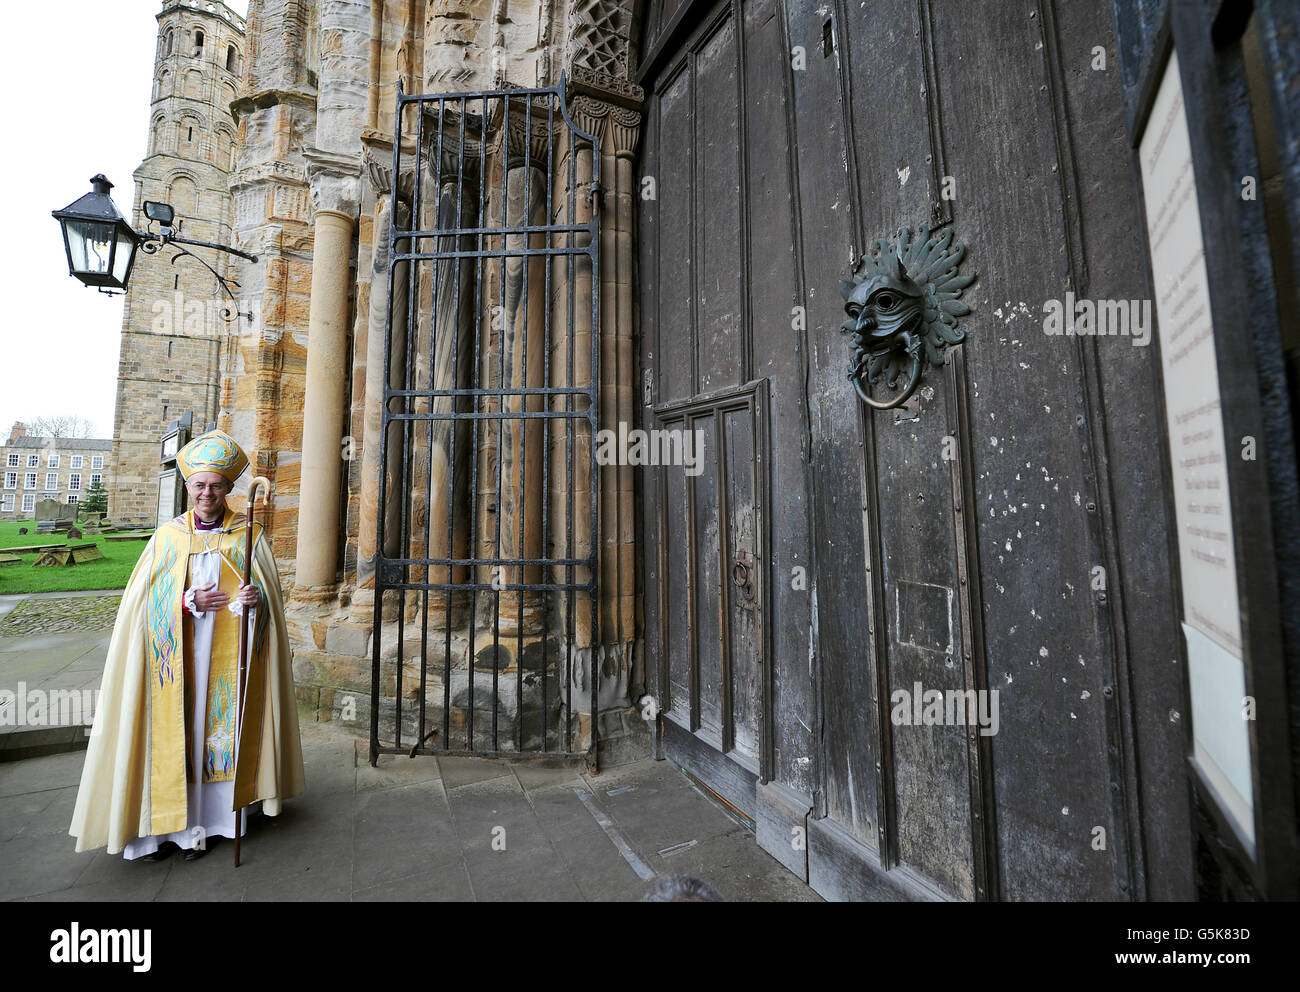 The Right Reverend Justin Welby is installed as the new Bishop of Durham in a ceremony at Durham Cathedral. Stock Photo